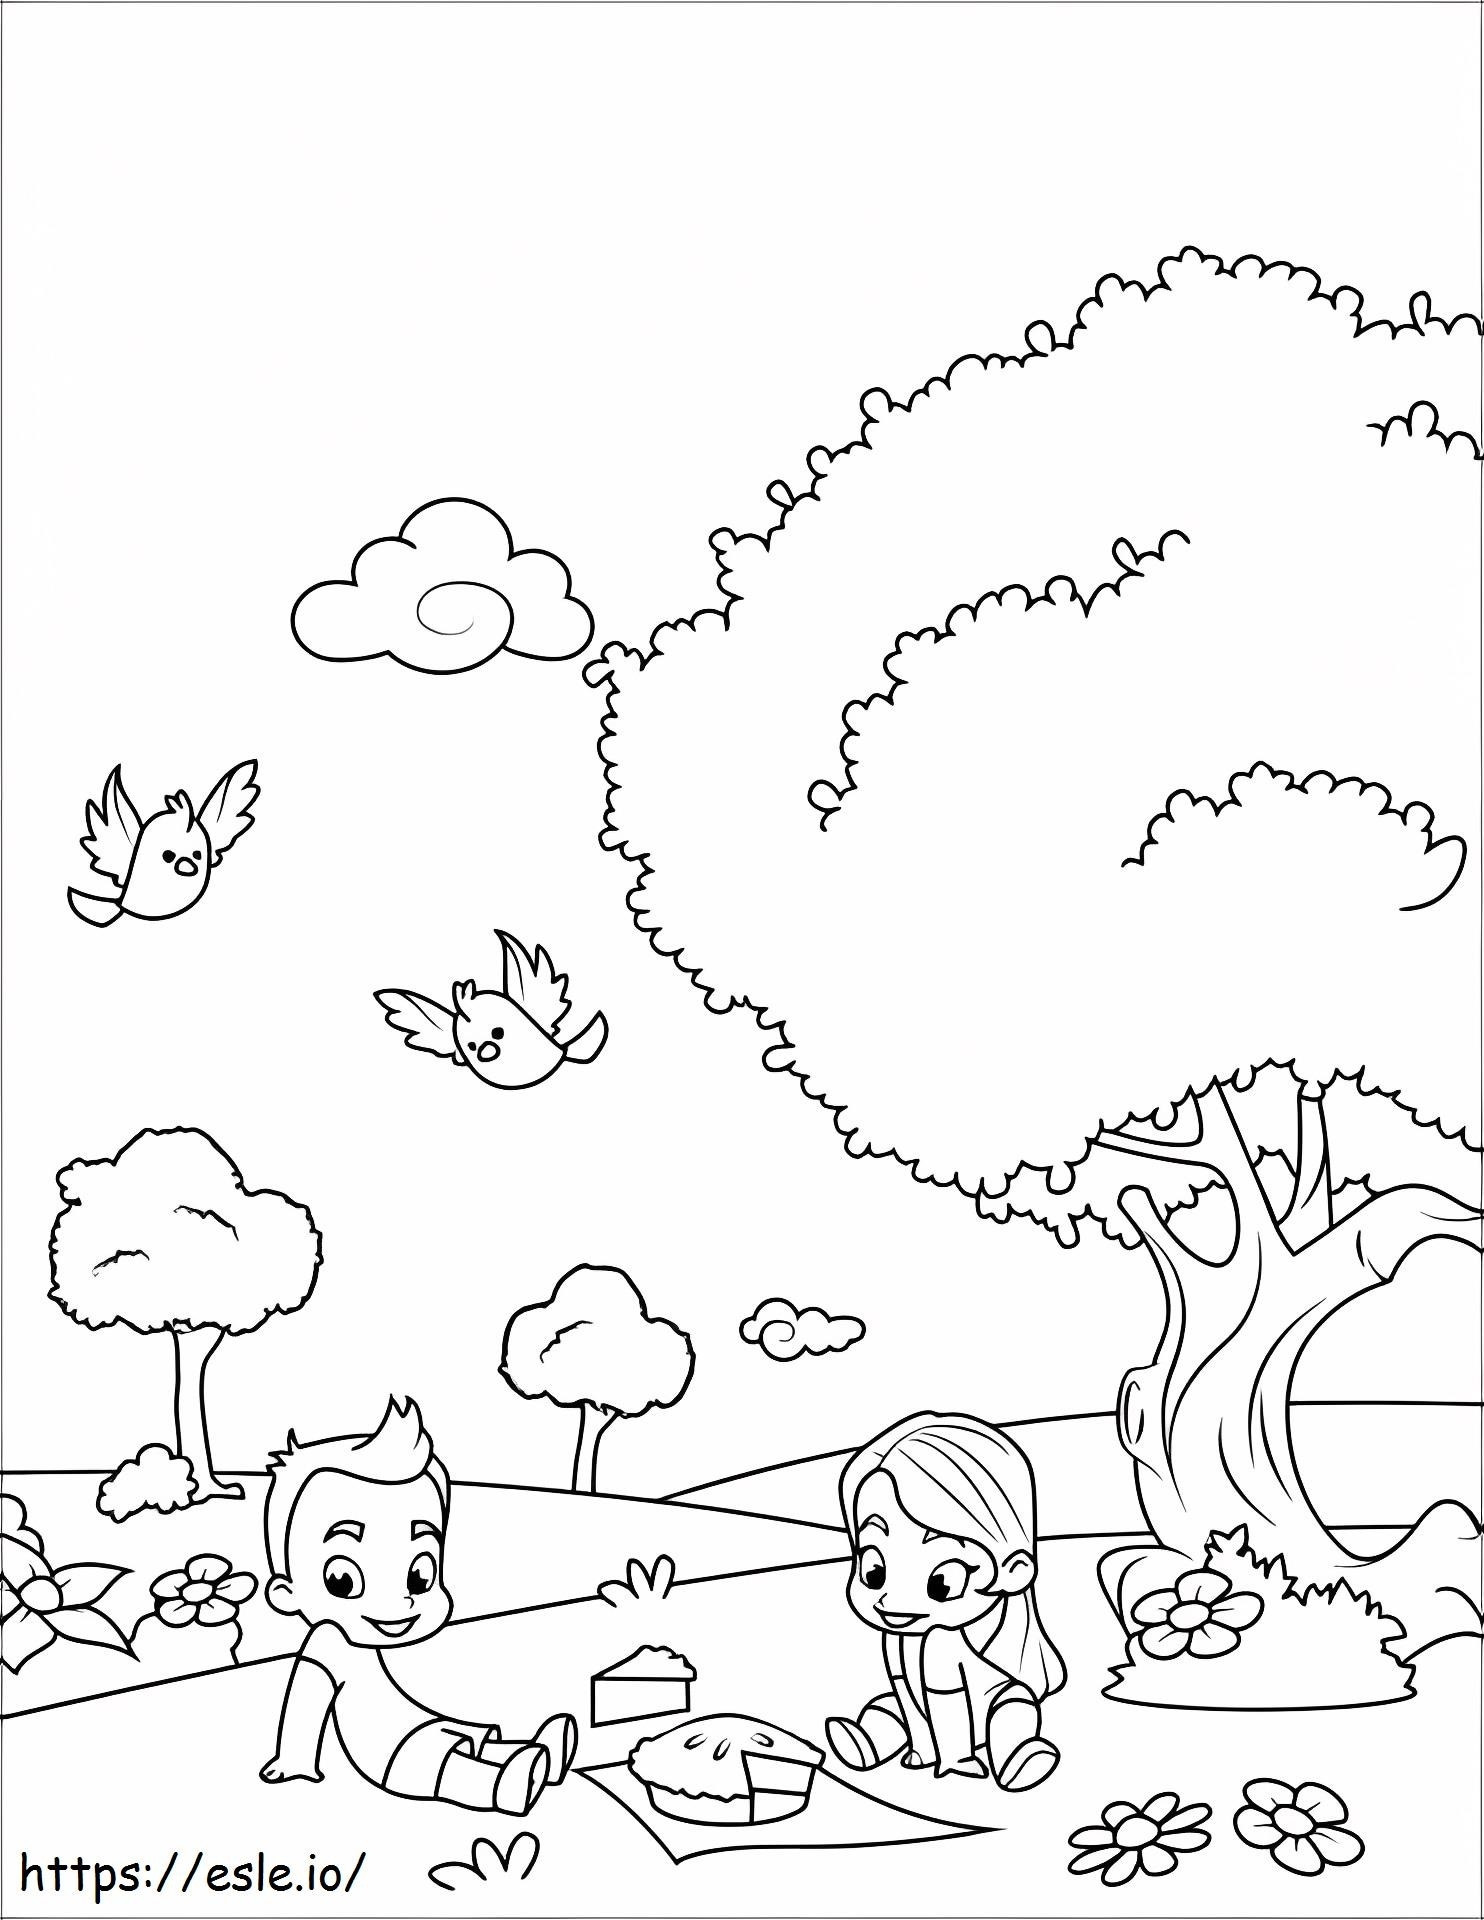 1533009559 2 Children Go On Picnic A4 coloring page